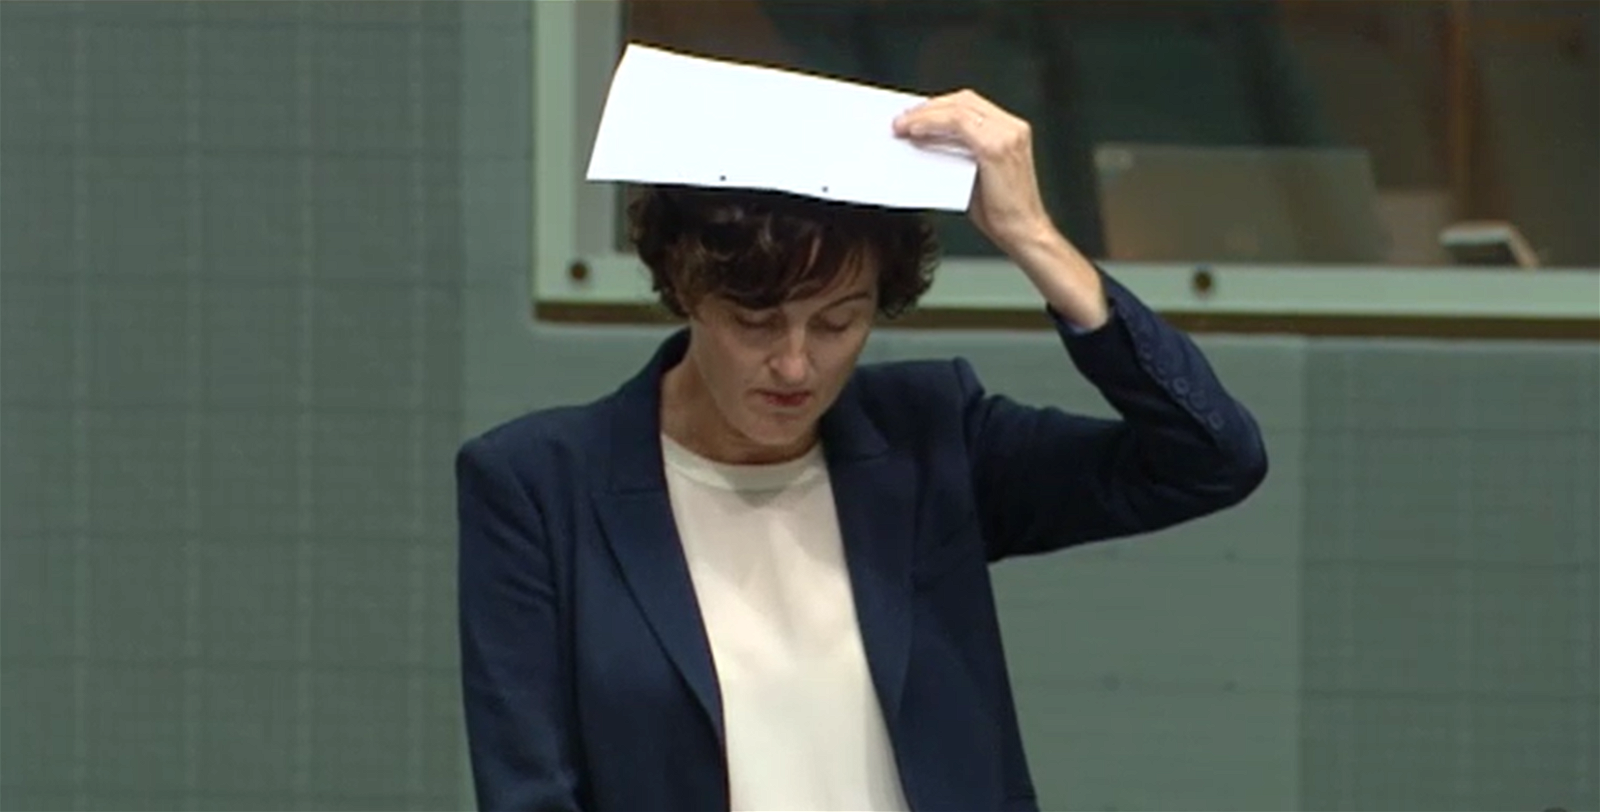 A middle-aged woman in a suit holds a piece of paper over her head.